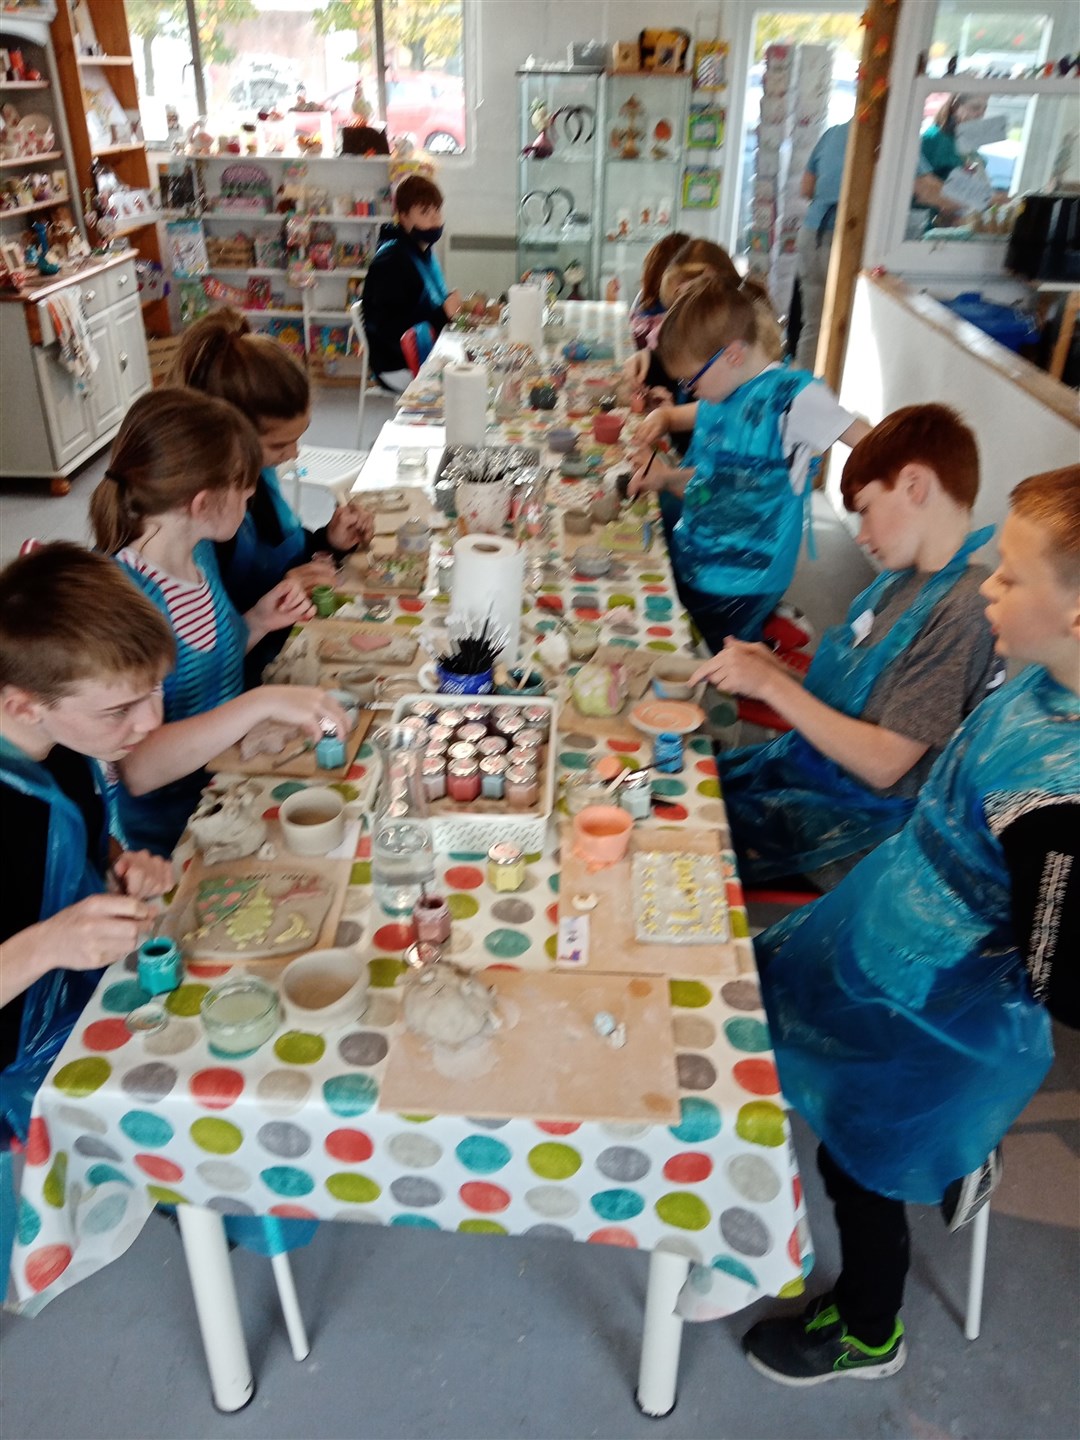 Pottery sessions proved popular.